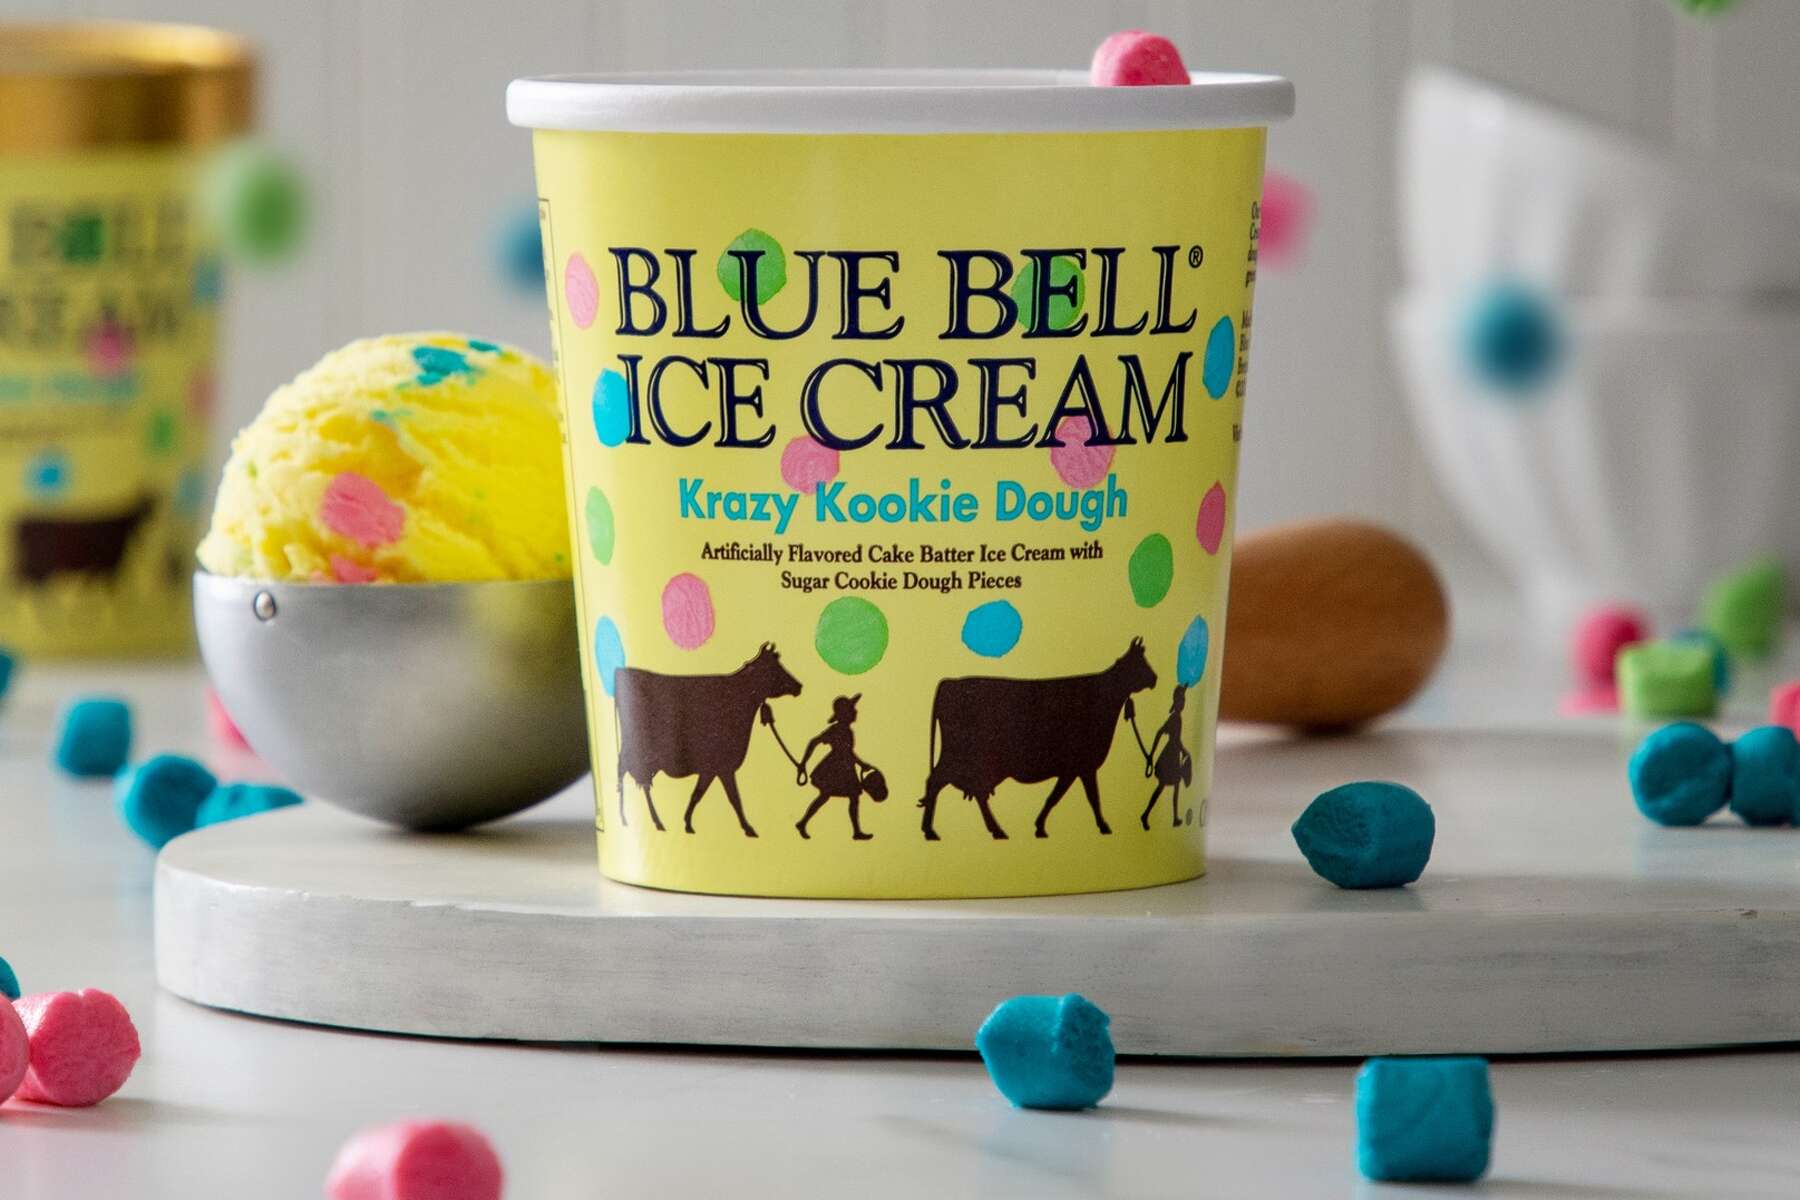 One Man's Heroic Quest to Sample Every Blue Bell Ice Cream Flavor